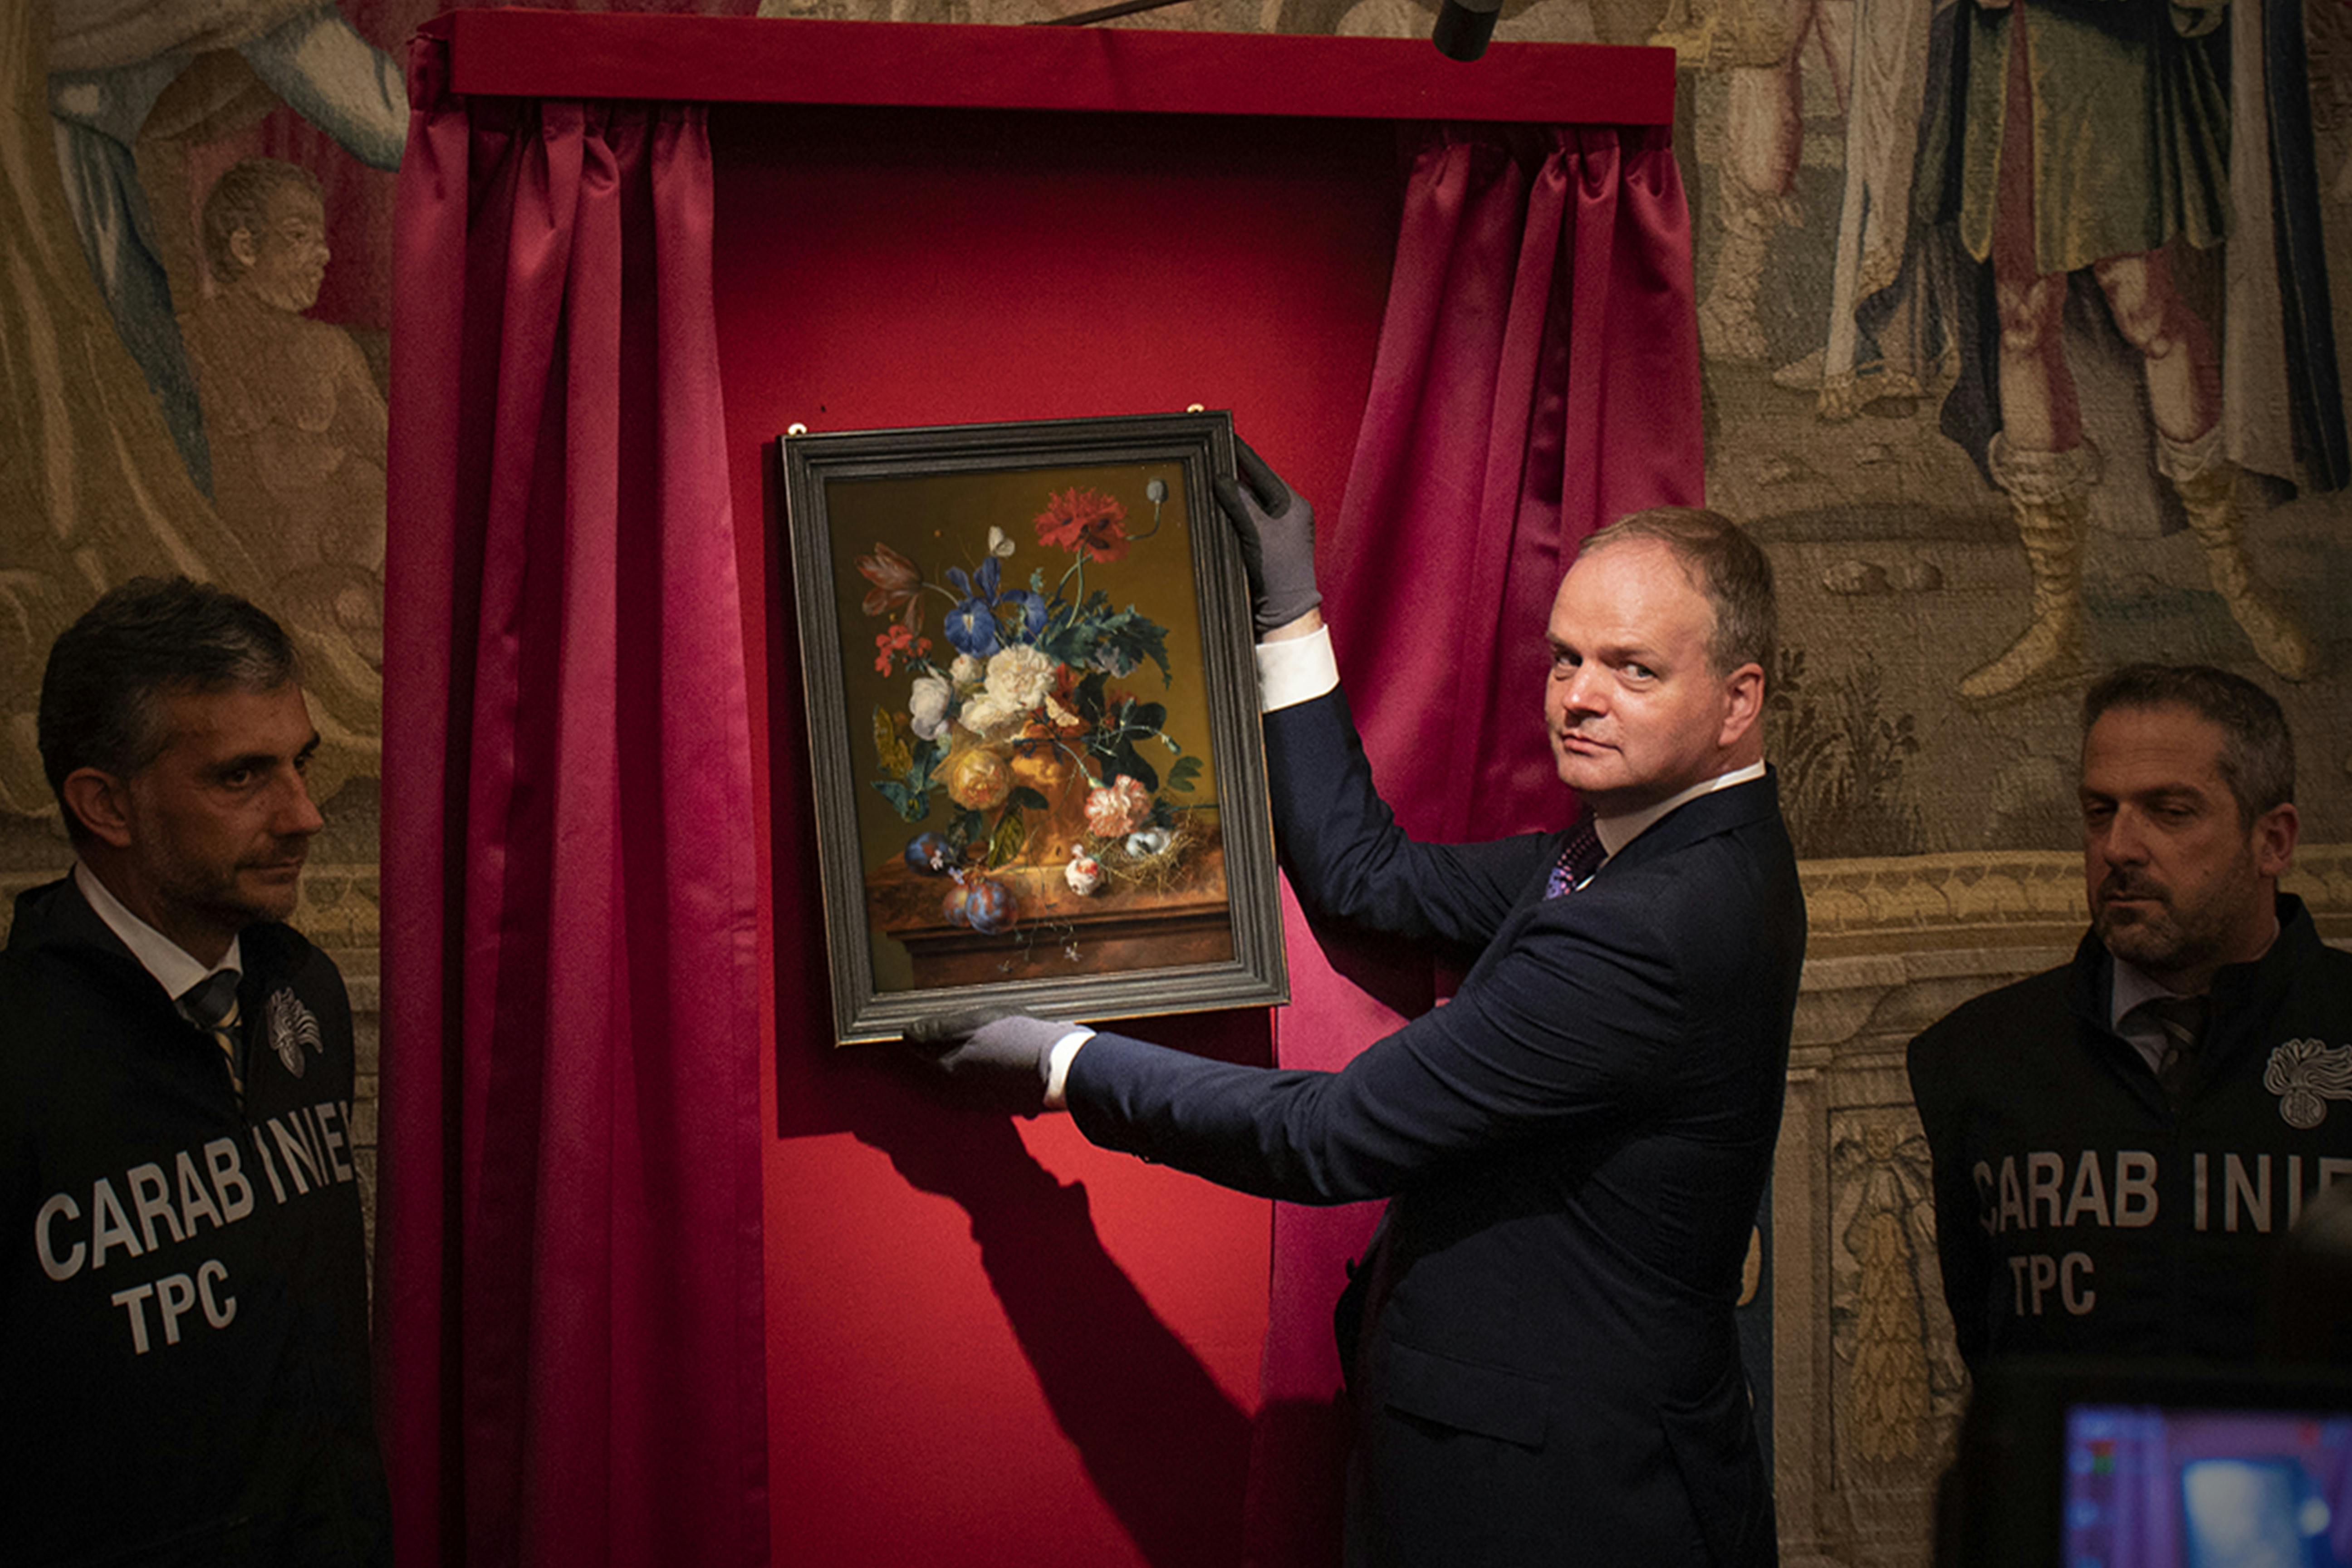 "The Flower Vase" by Jan van Huysum has returned to Pitti Palace!